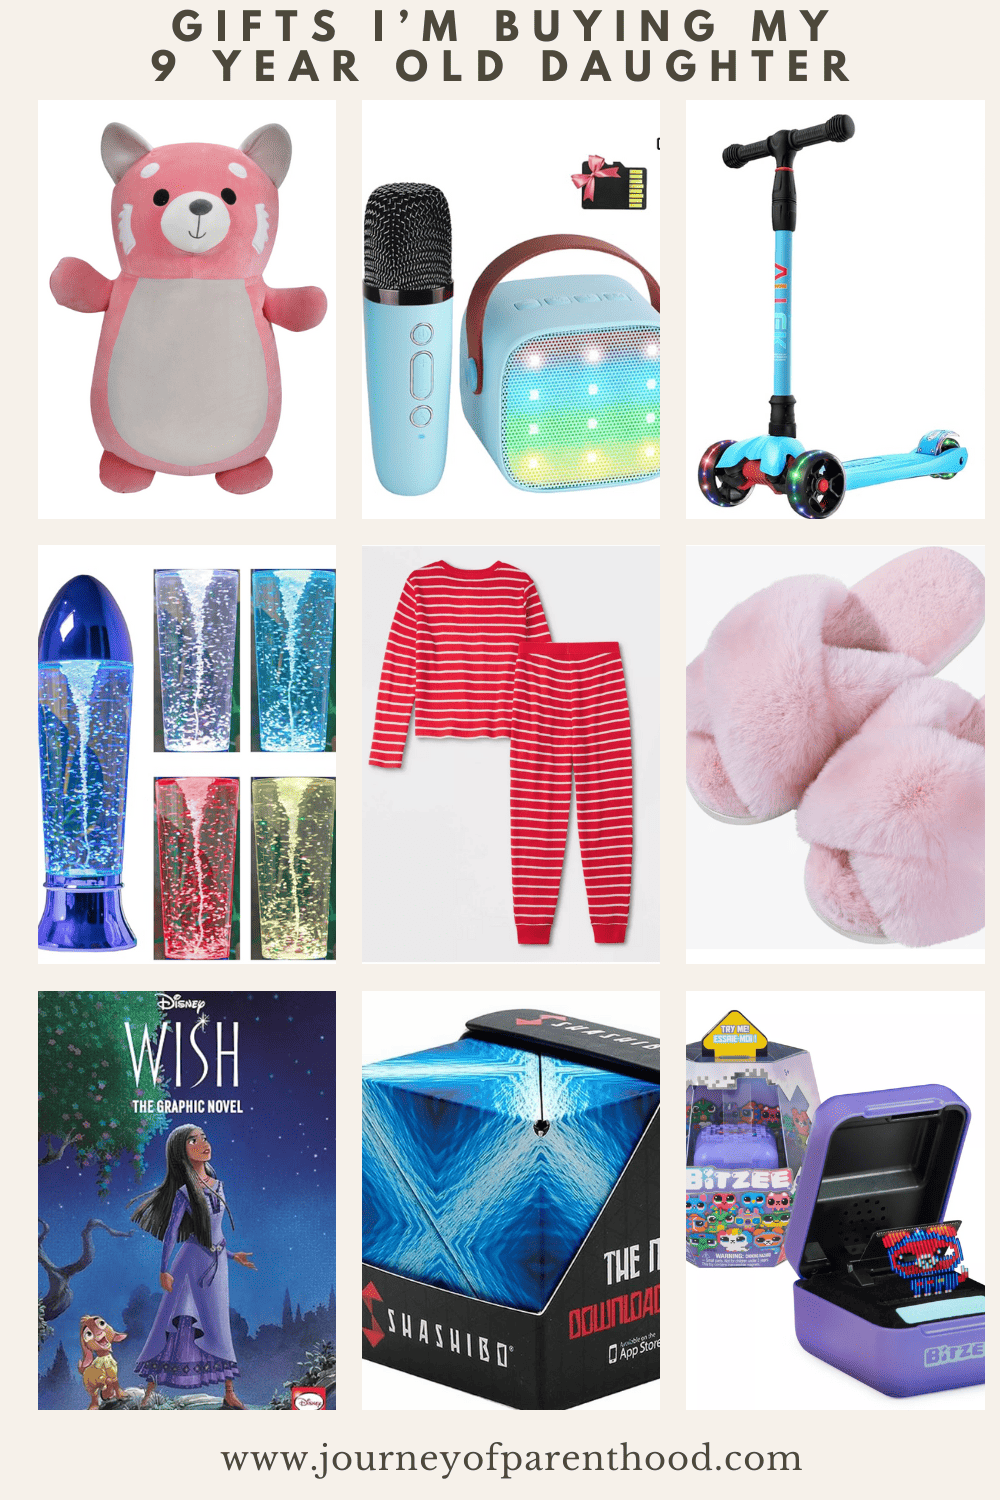 9 year old girl gift guide - presents for 9 year old girl - what i'm buying my 9 year old daughter this year 